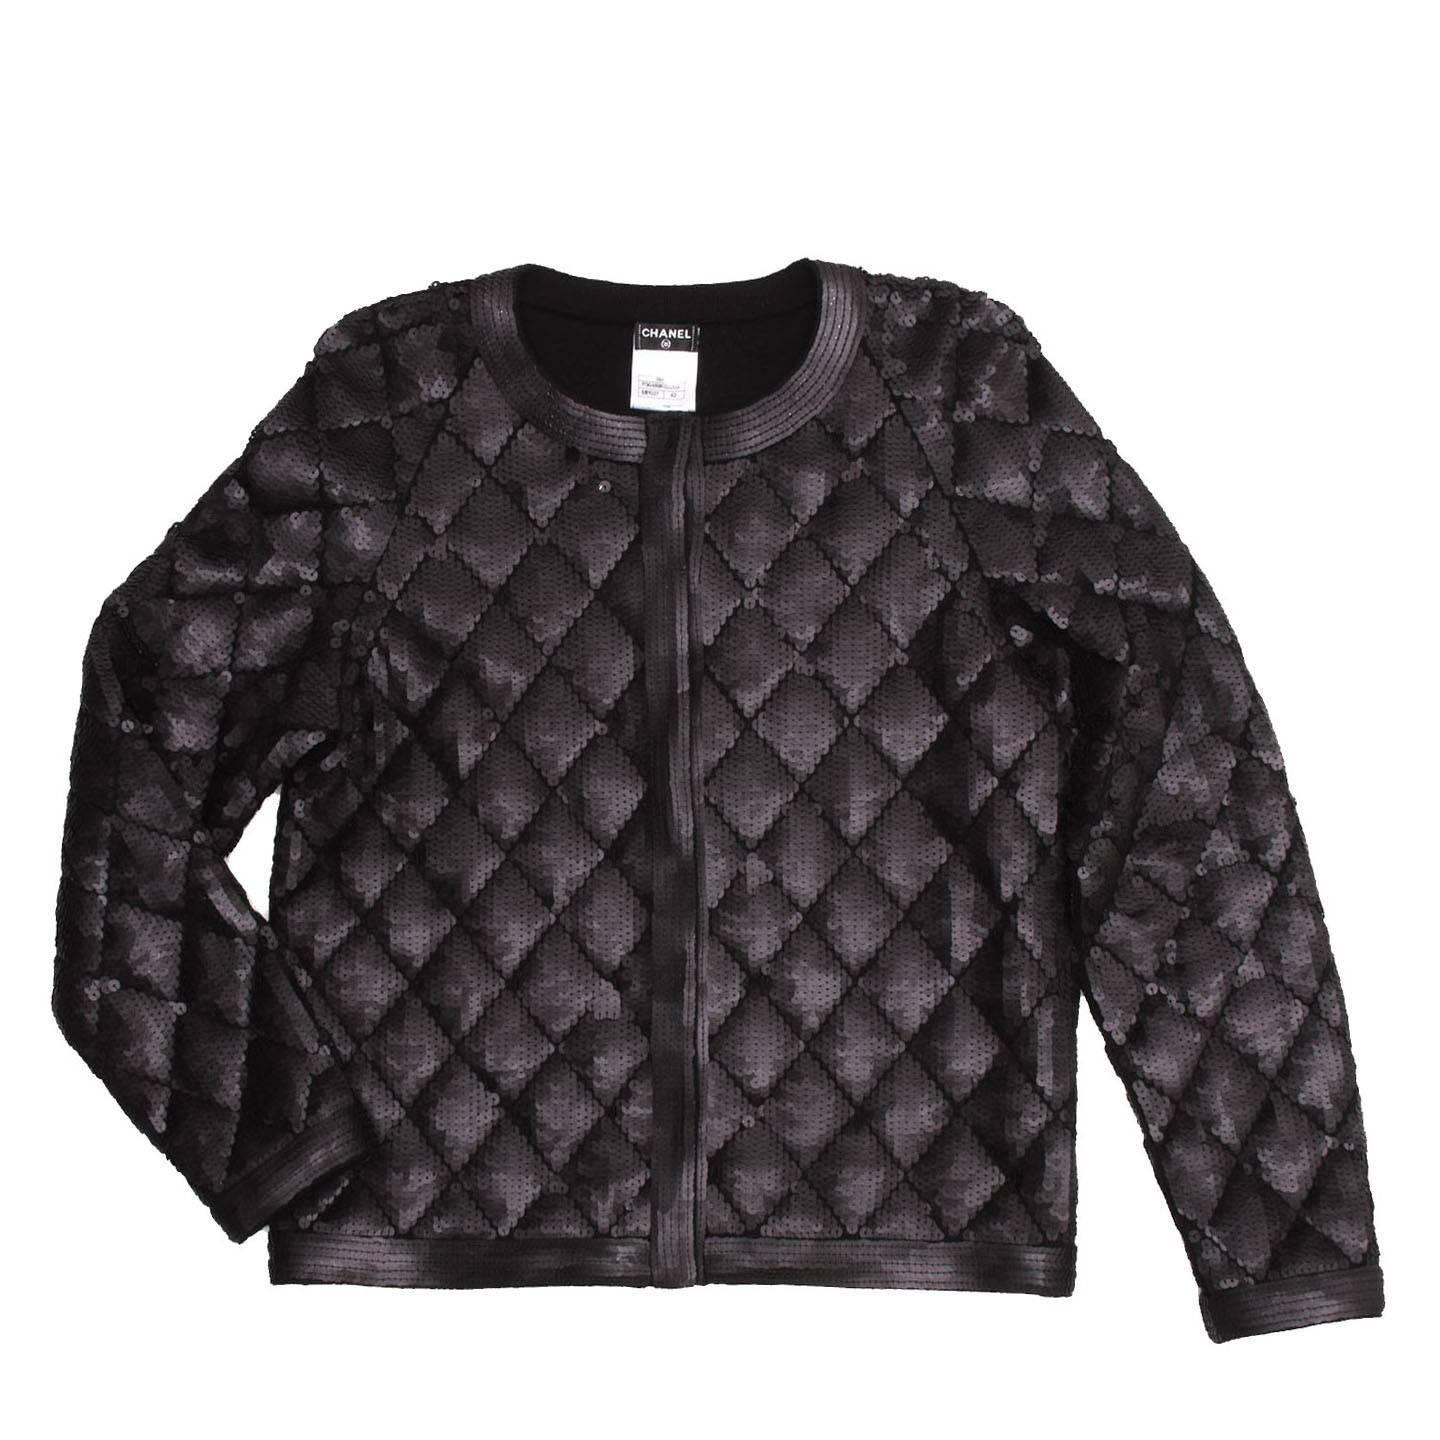 09A Collection: Black sequined classic Chanel quilted pattern cardigan style jacket.

Size  42 French sizing

Condition  Pristine and Excellent: never worn